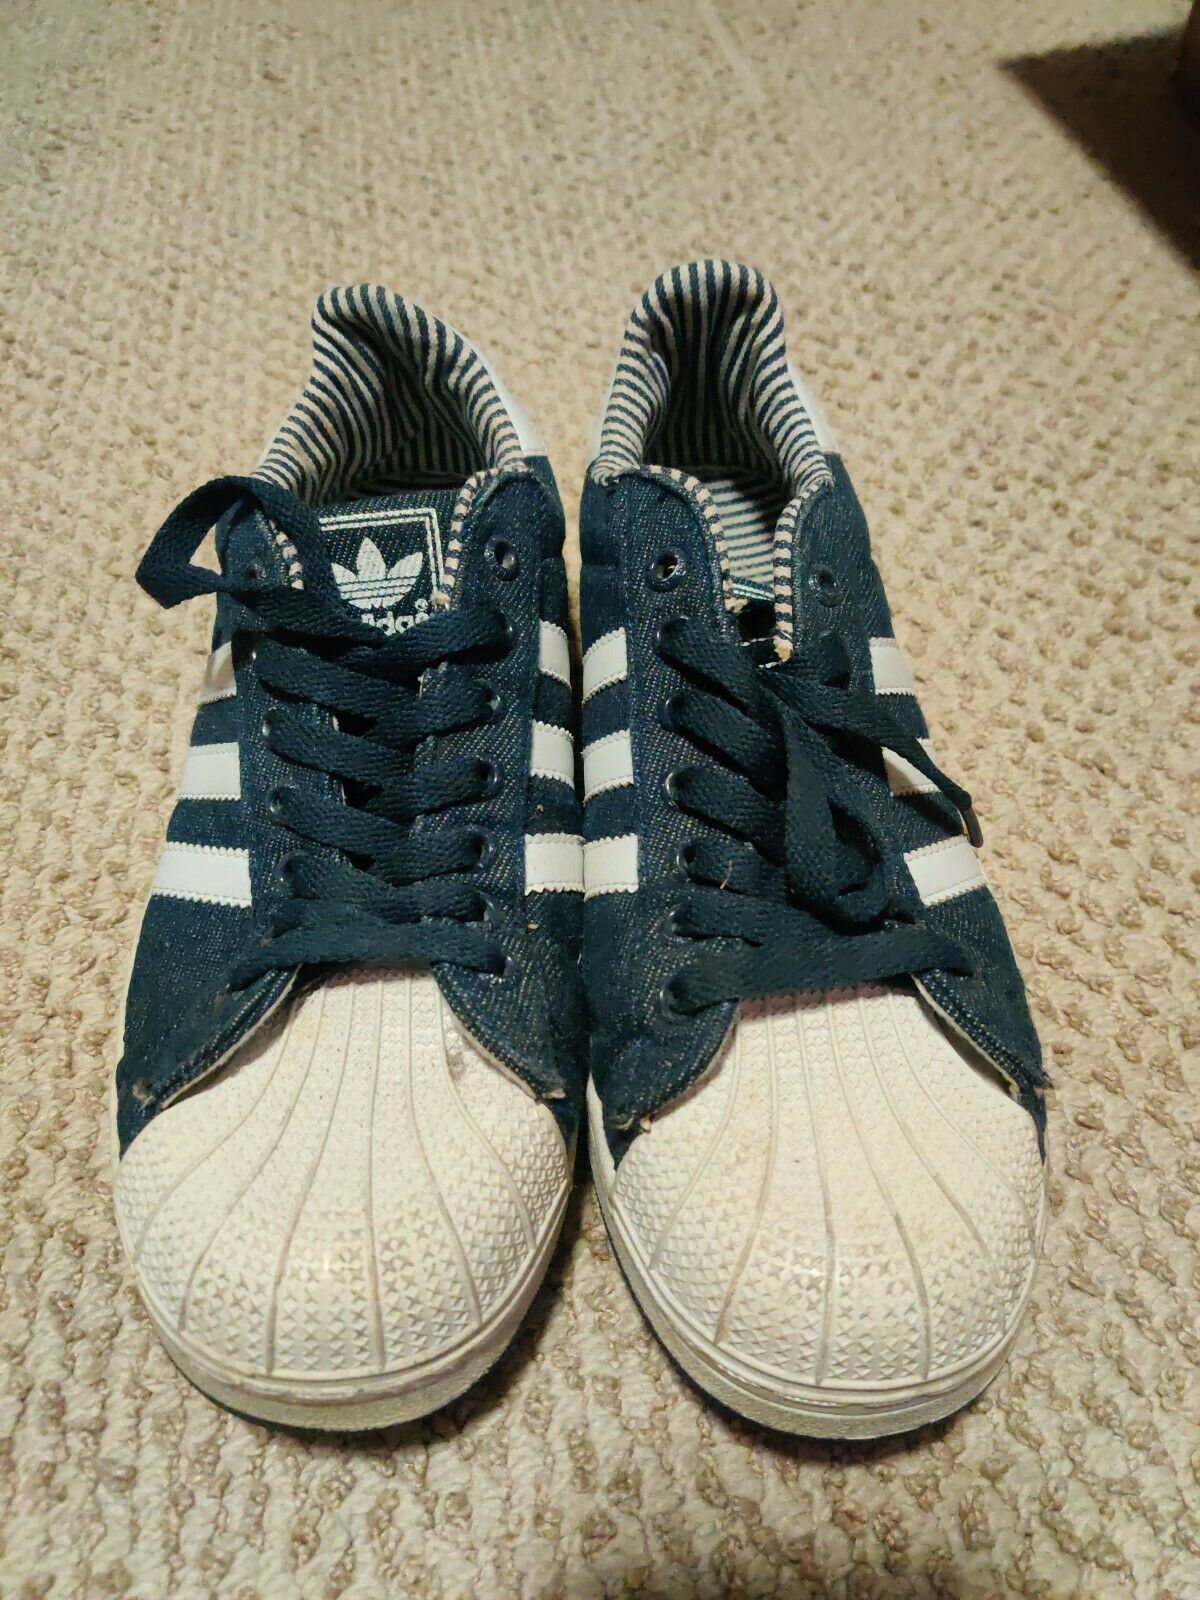 Adidas jeans blue Limited Edition Shoes Mens US Size 9.5 APE779001 Free shippin